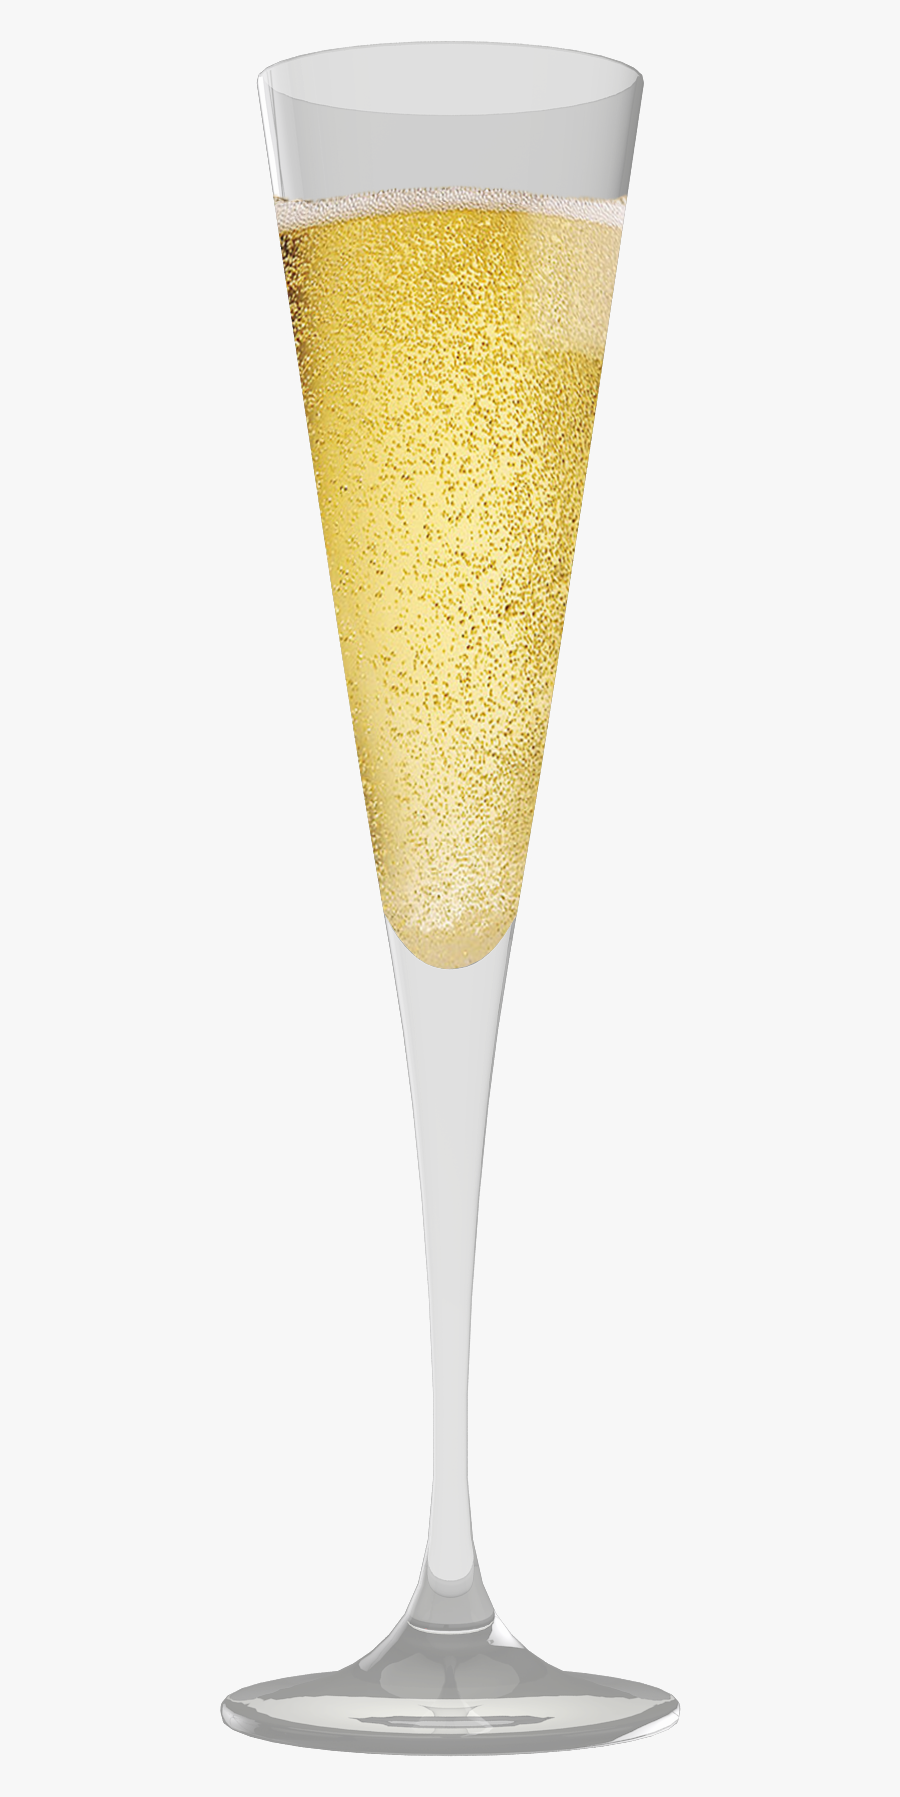 Champagne Glass Png Clipart - Transparent Clipart Champagne Glasses, Transparent Clipart